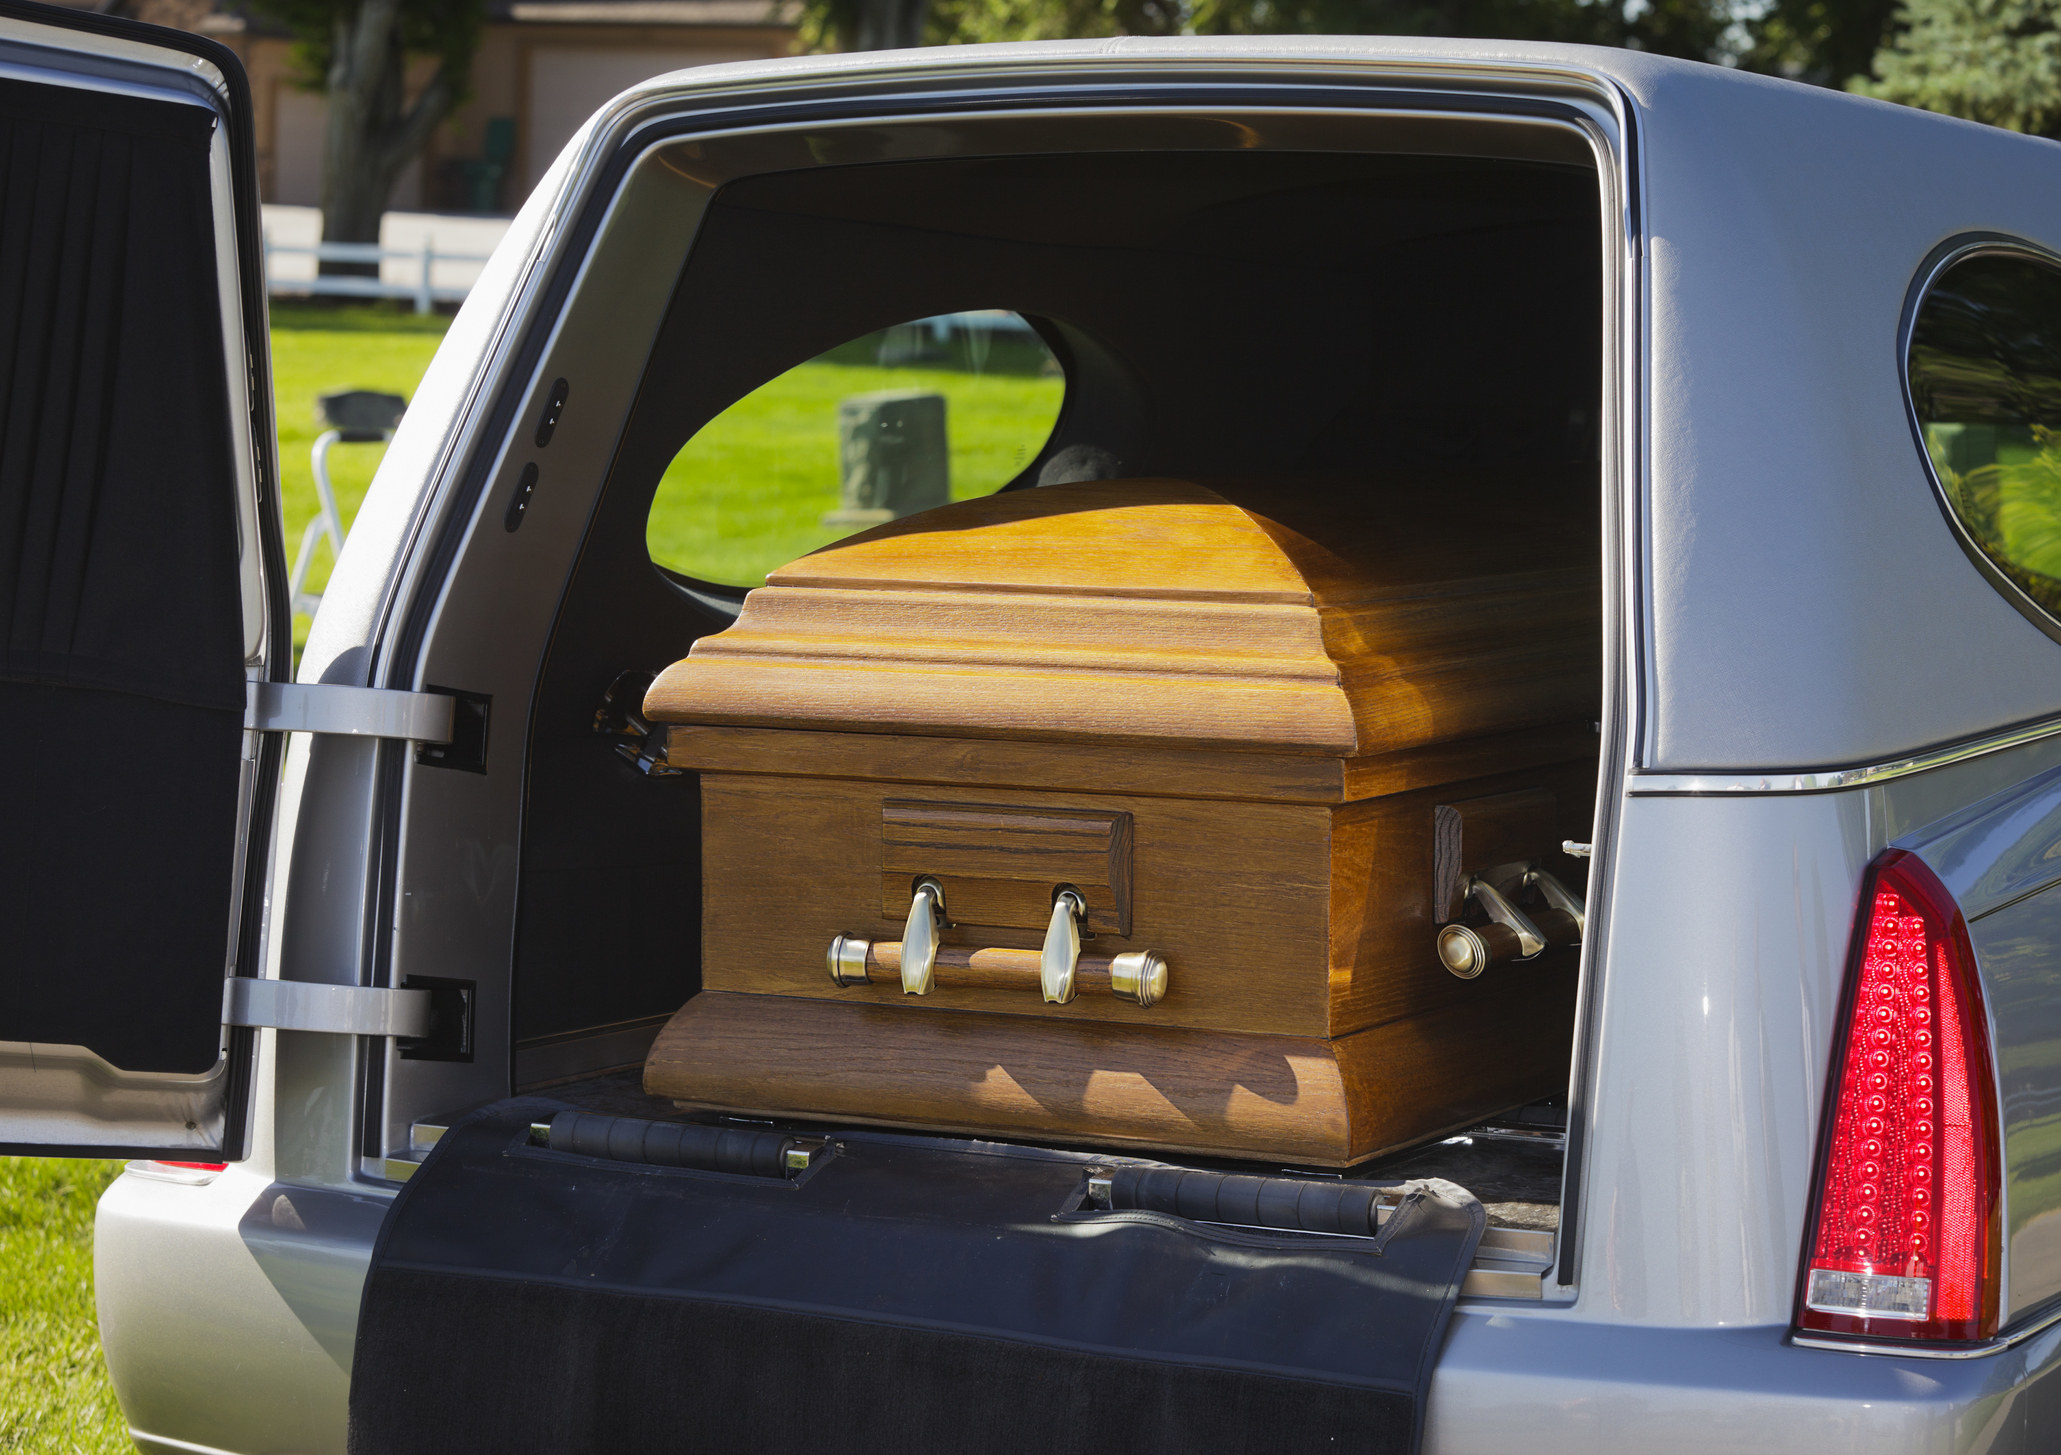 A casket in the backseat of a funeral hearse